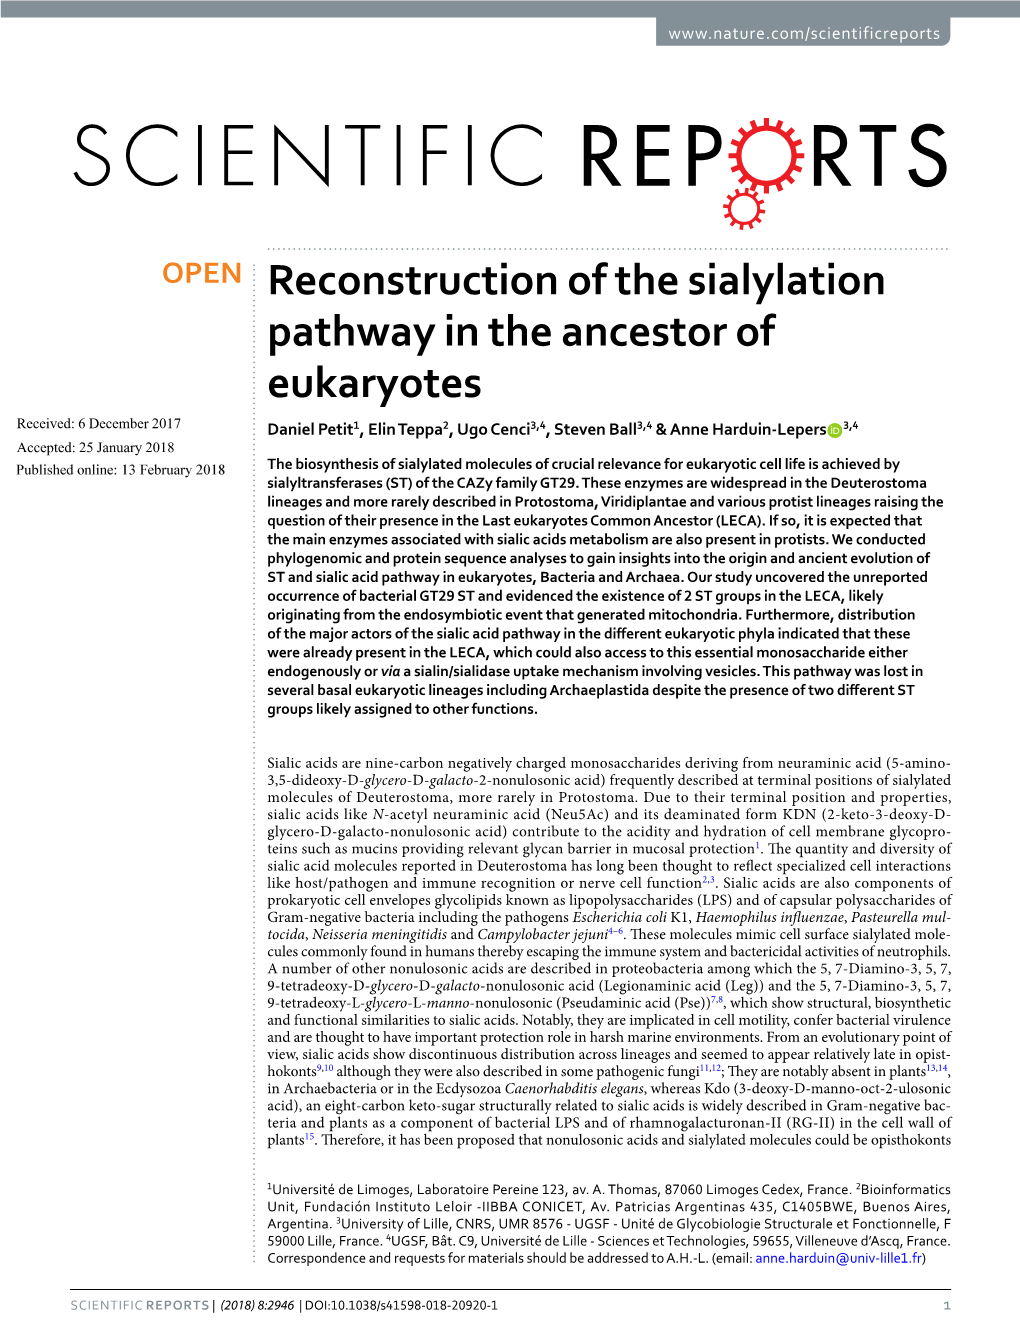 Reconstruction of the Sialylation Pathway in the Ancestor of Eukaryotes